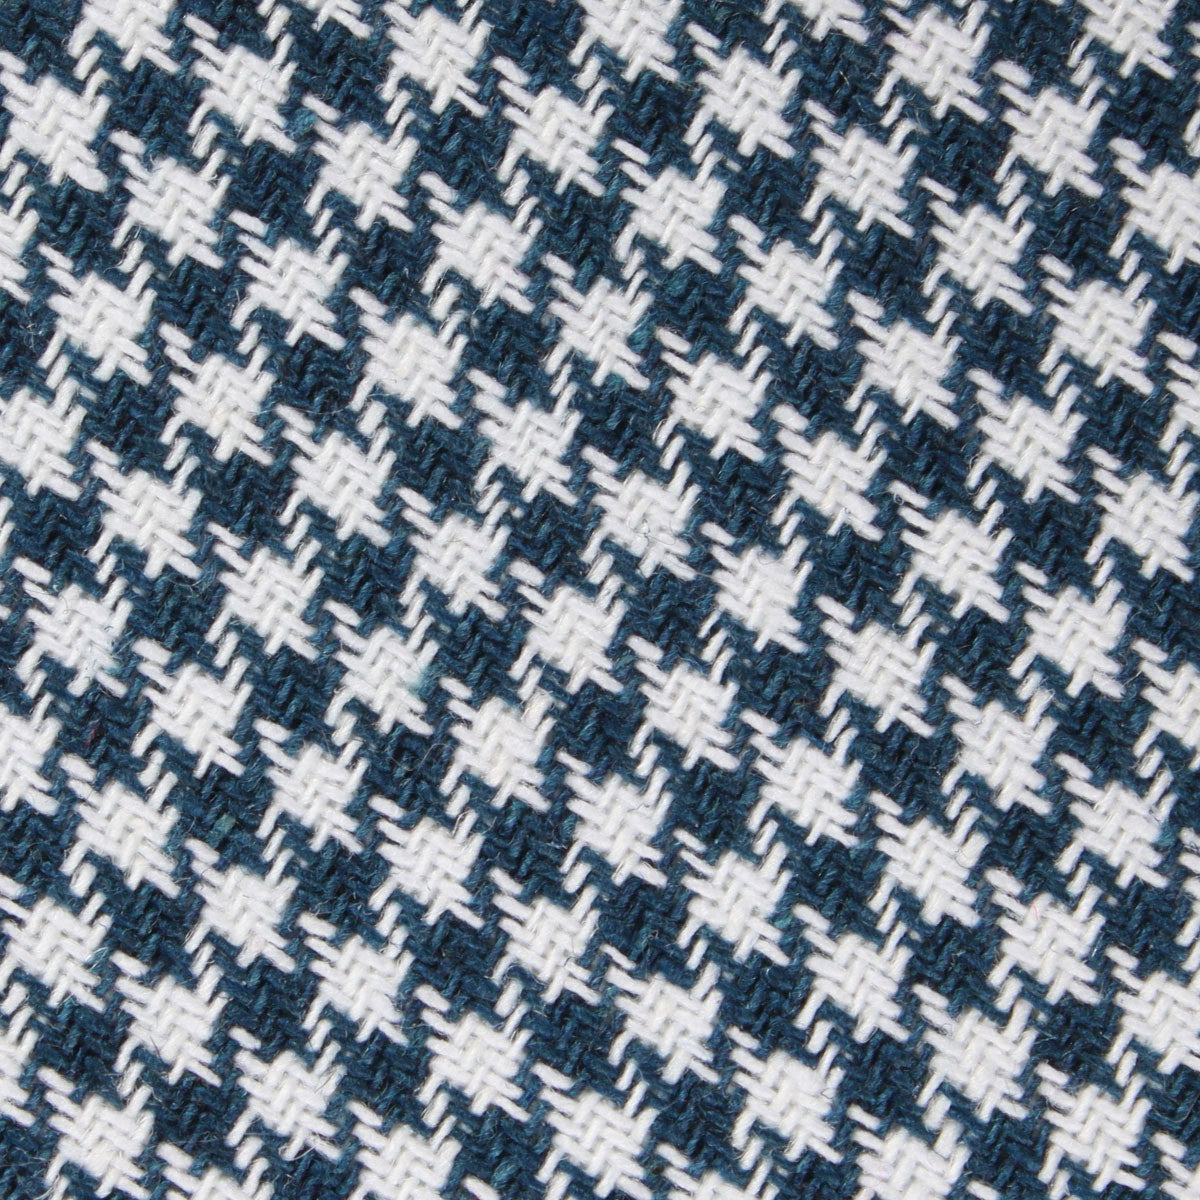 Blue Houndstooth Raw Linen Fabric Skinny Tie